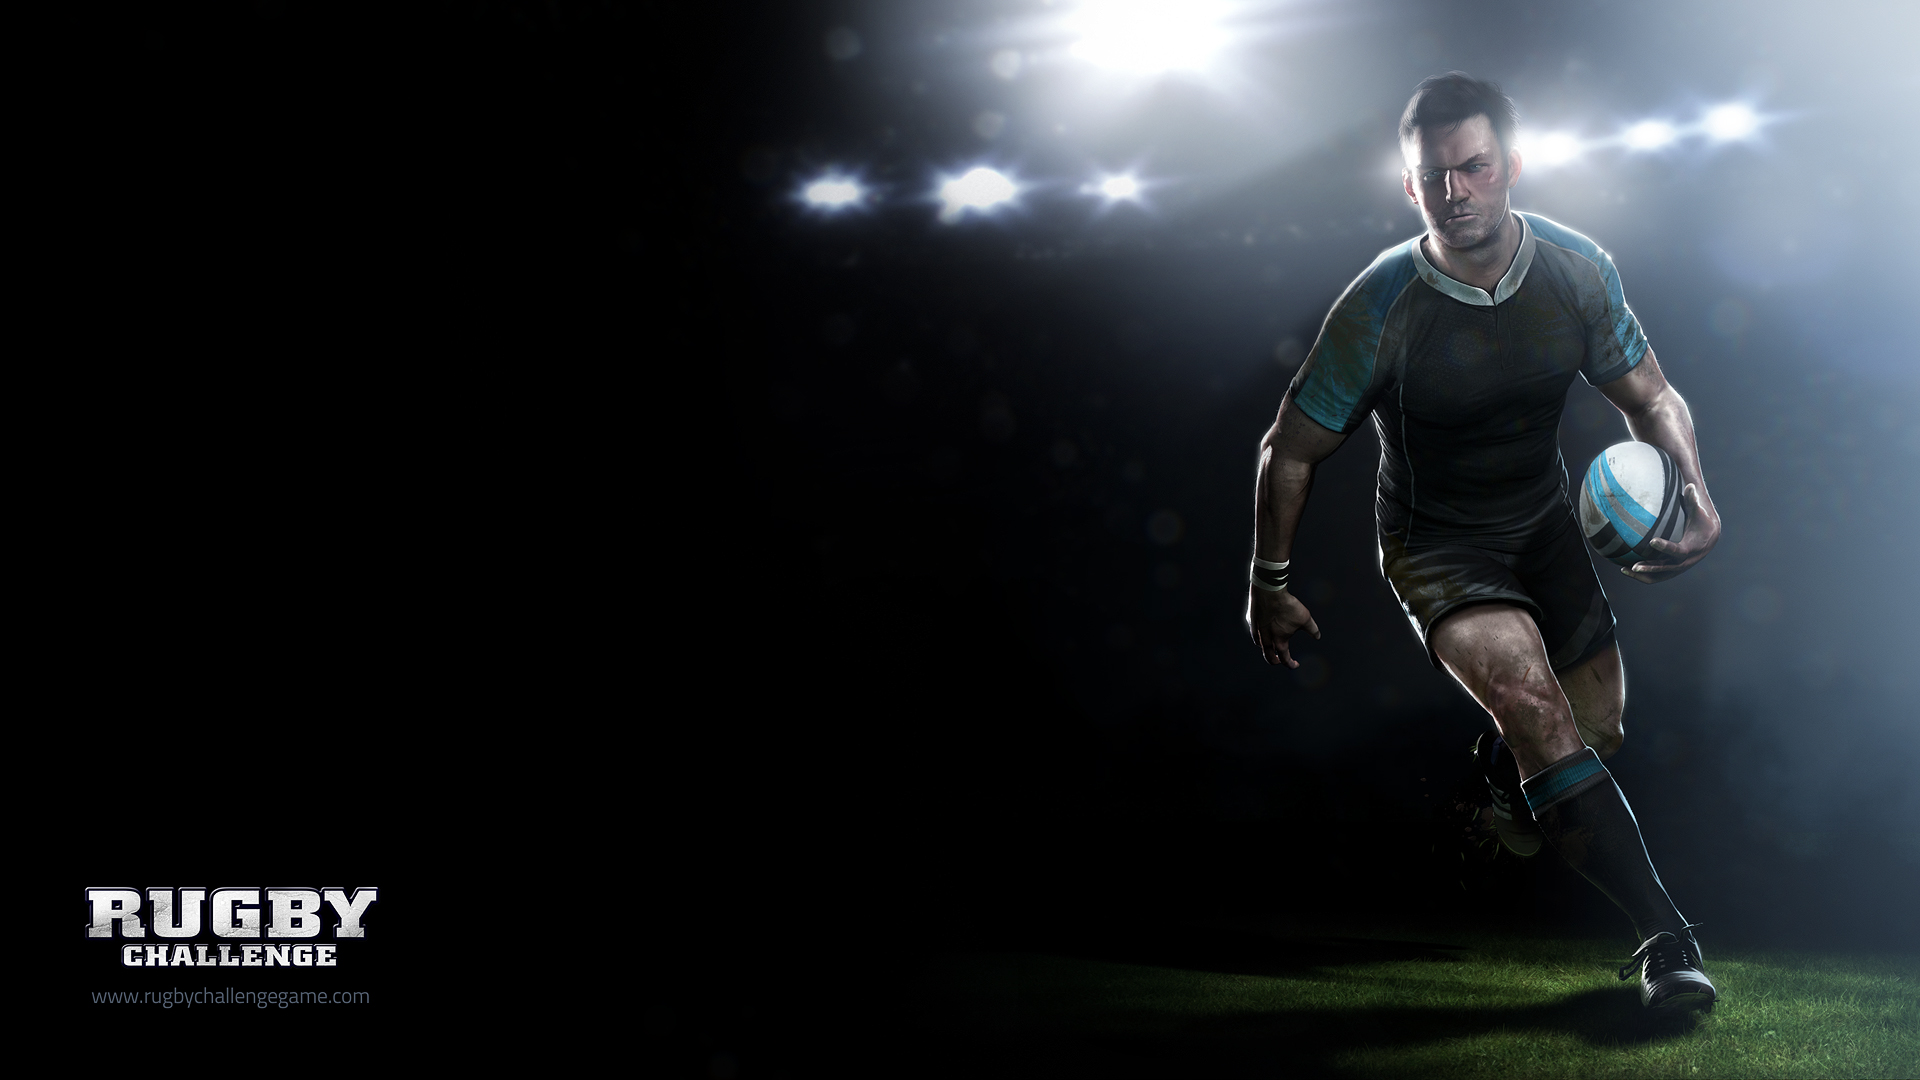 Free All Blacks Rugby Team background image